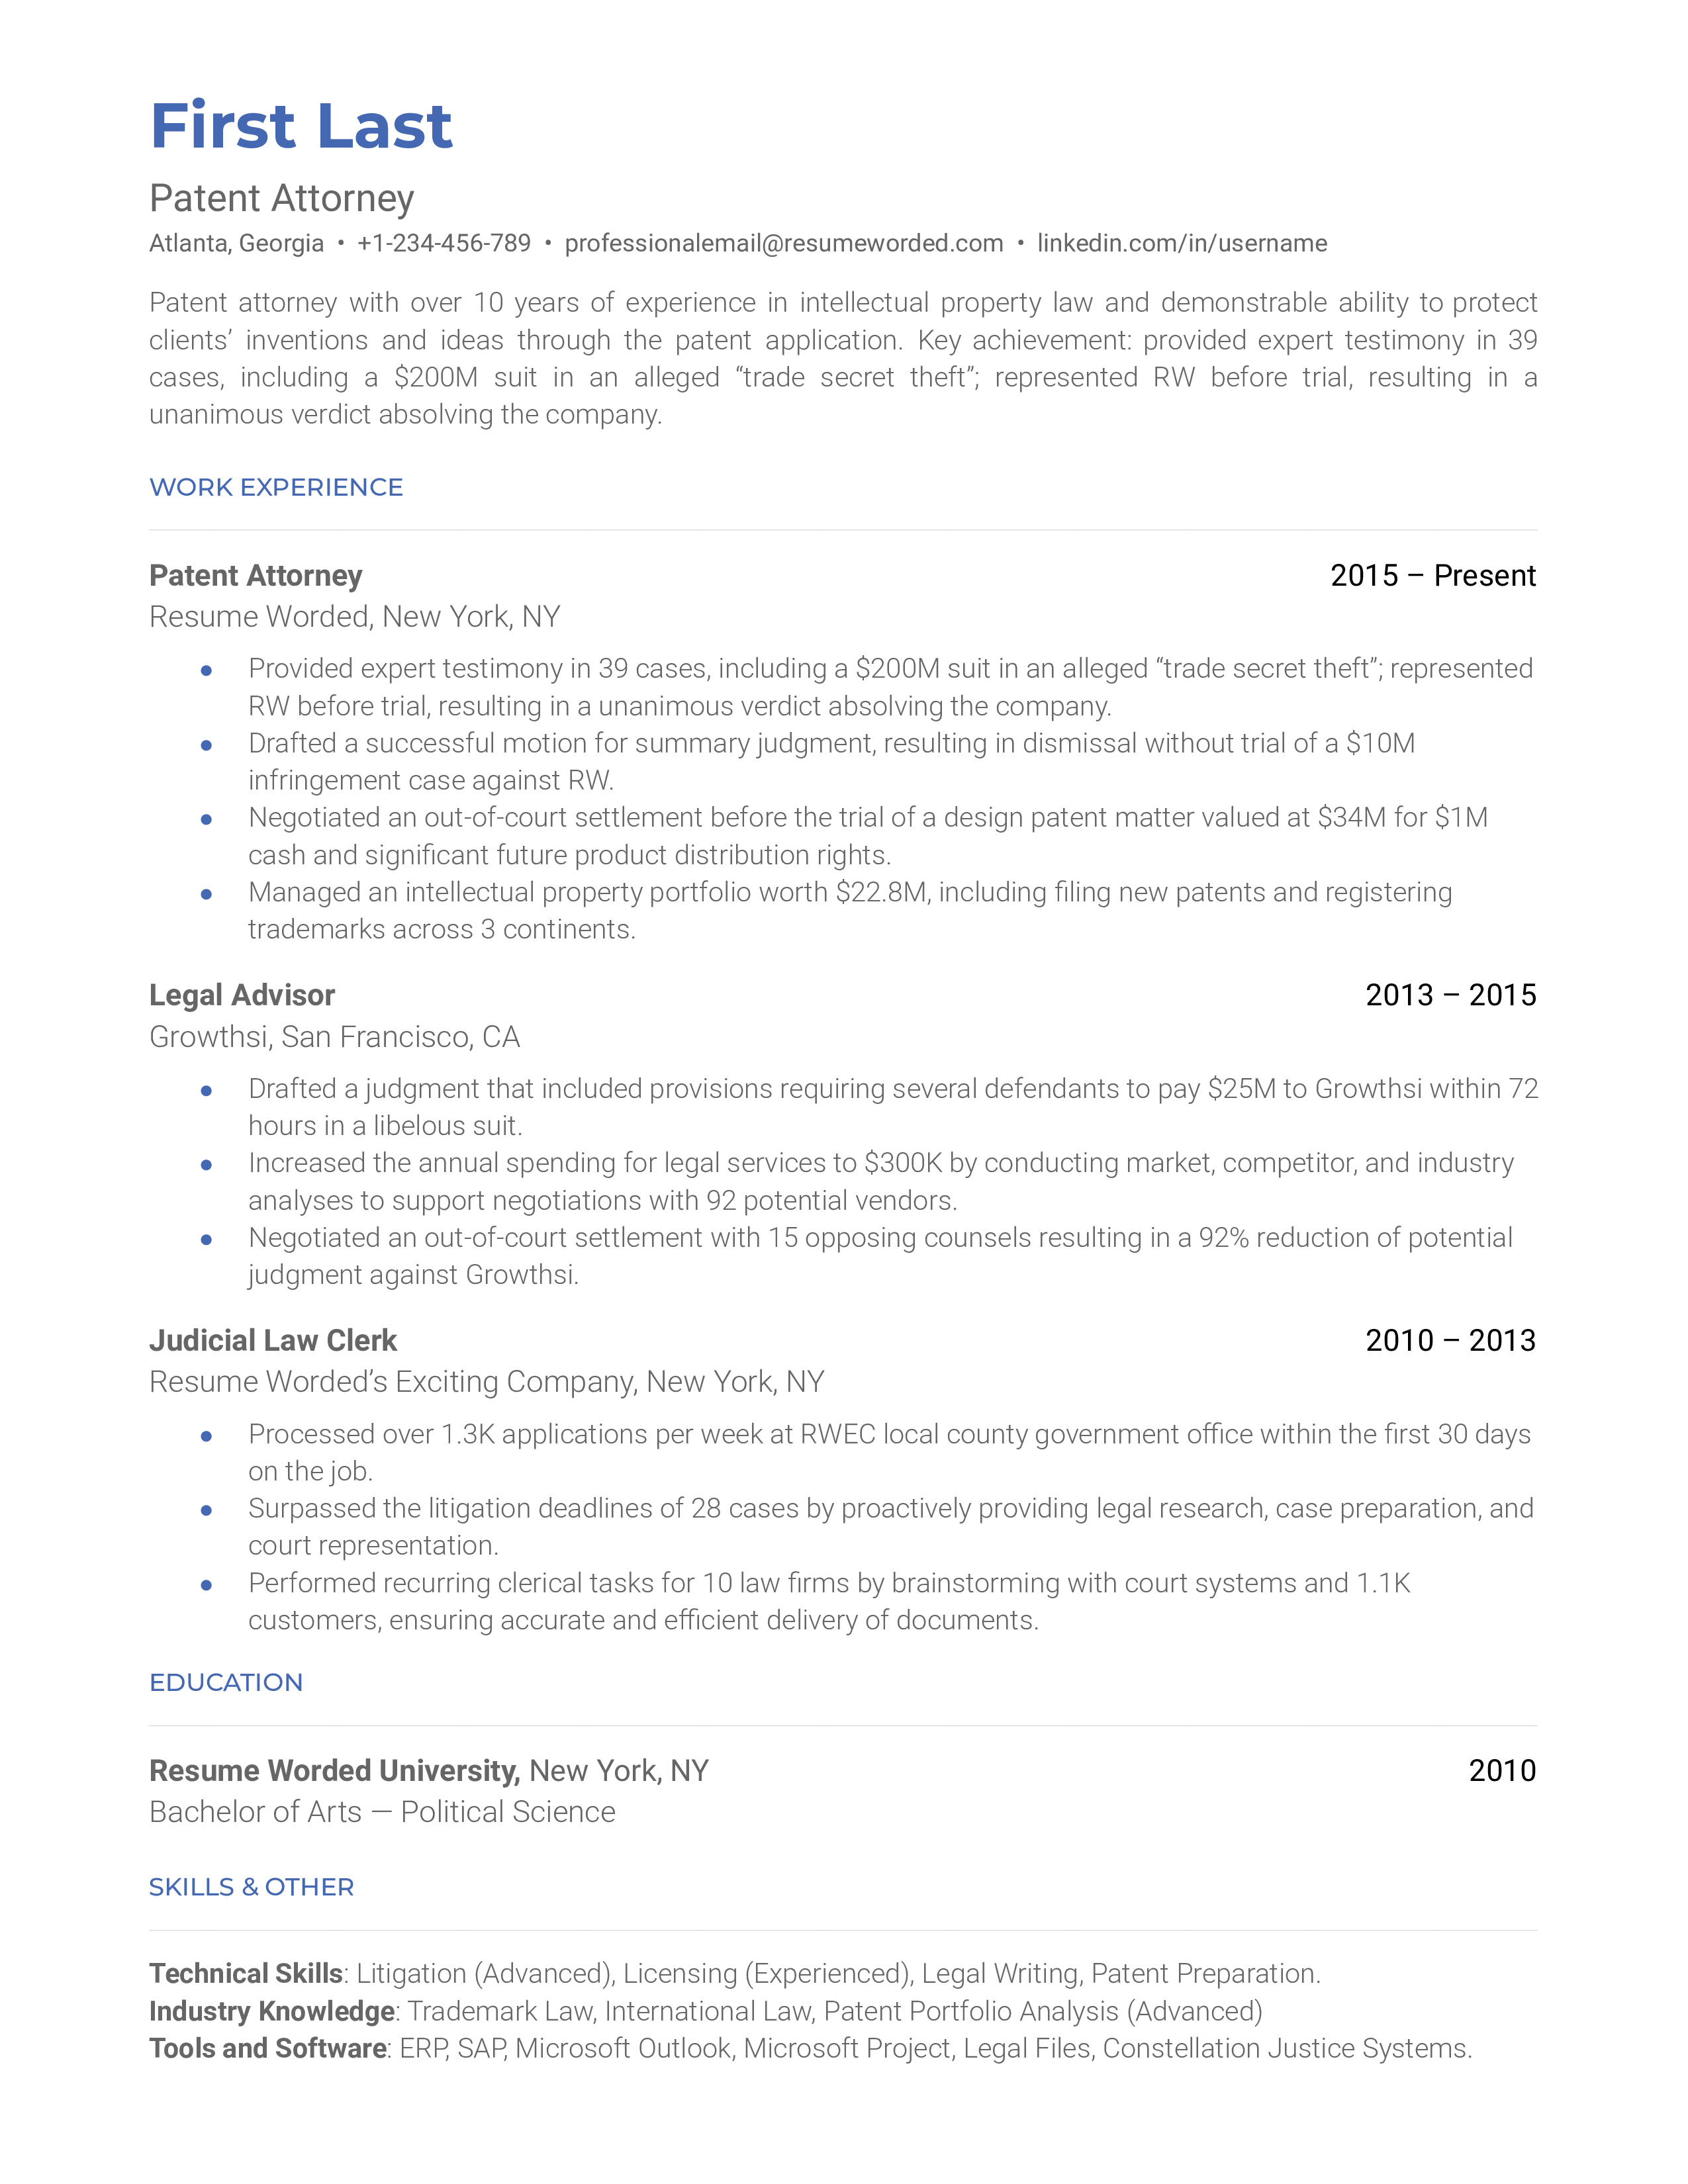 A patent attorney resume sample that highlights the applicant’s key achievements and experience.